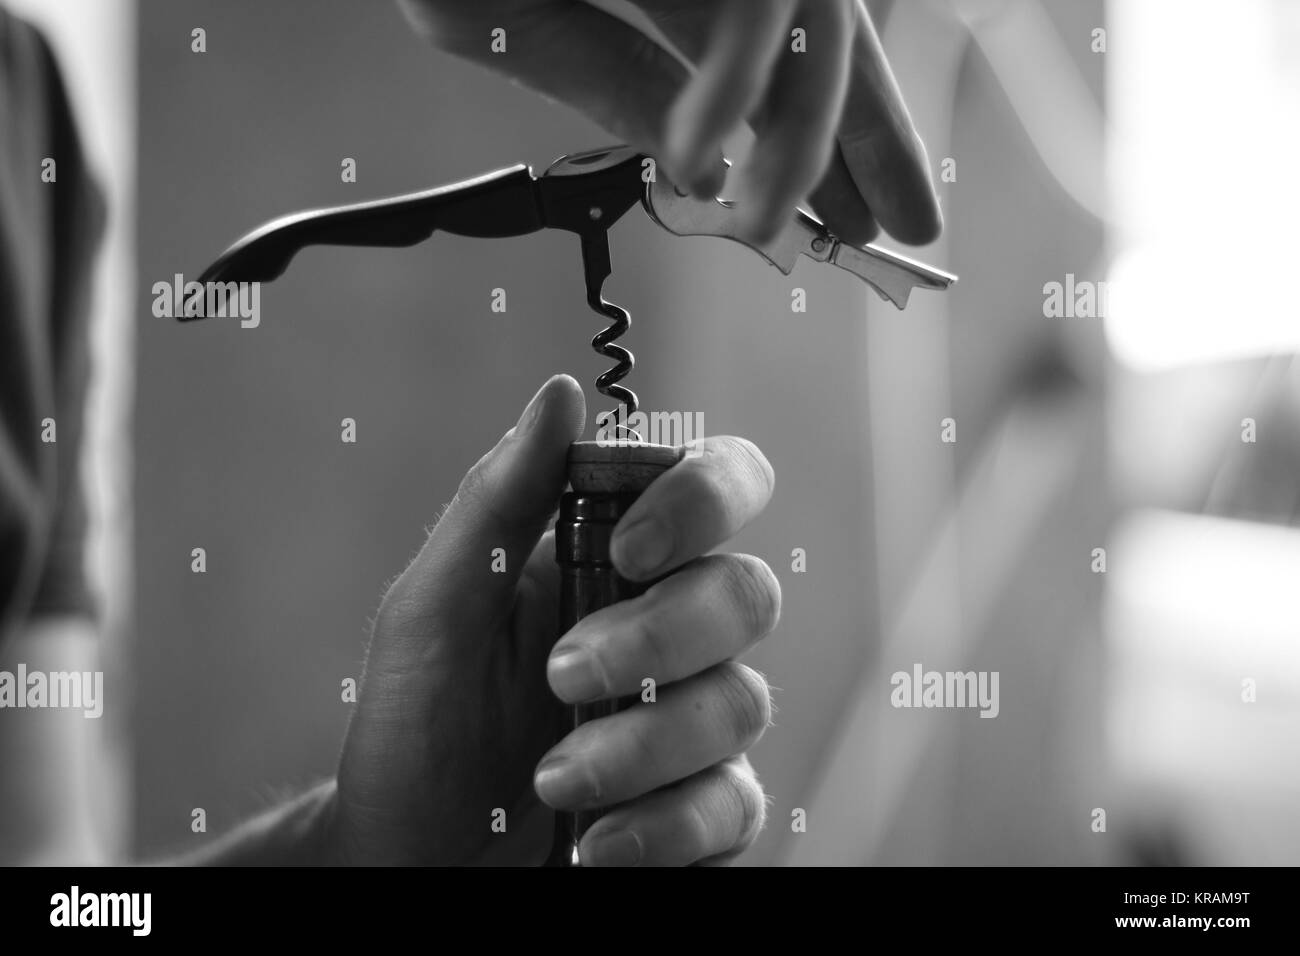 Hands opening a wine bottle with a metal corkscrew. Black and white. Stock Photo